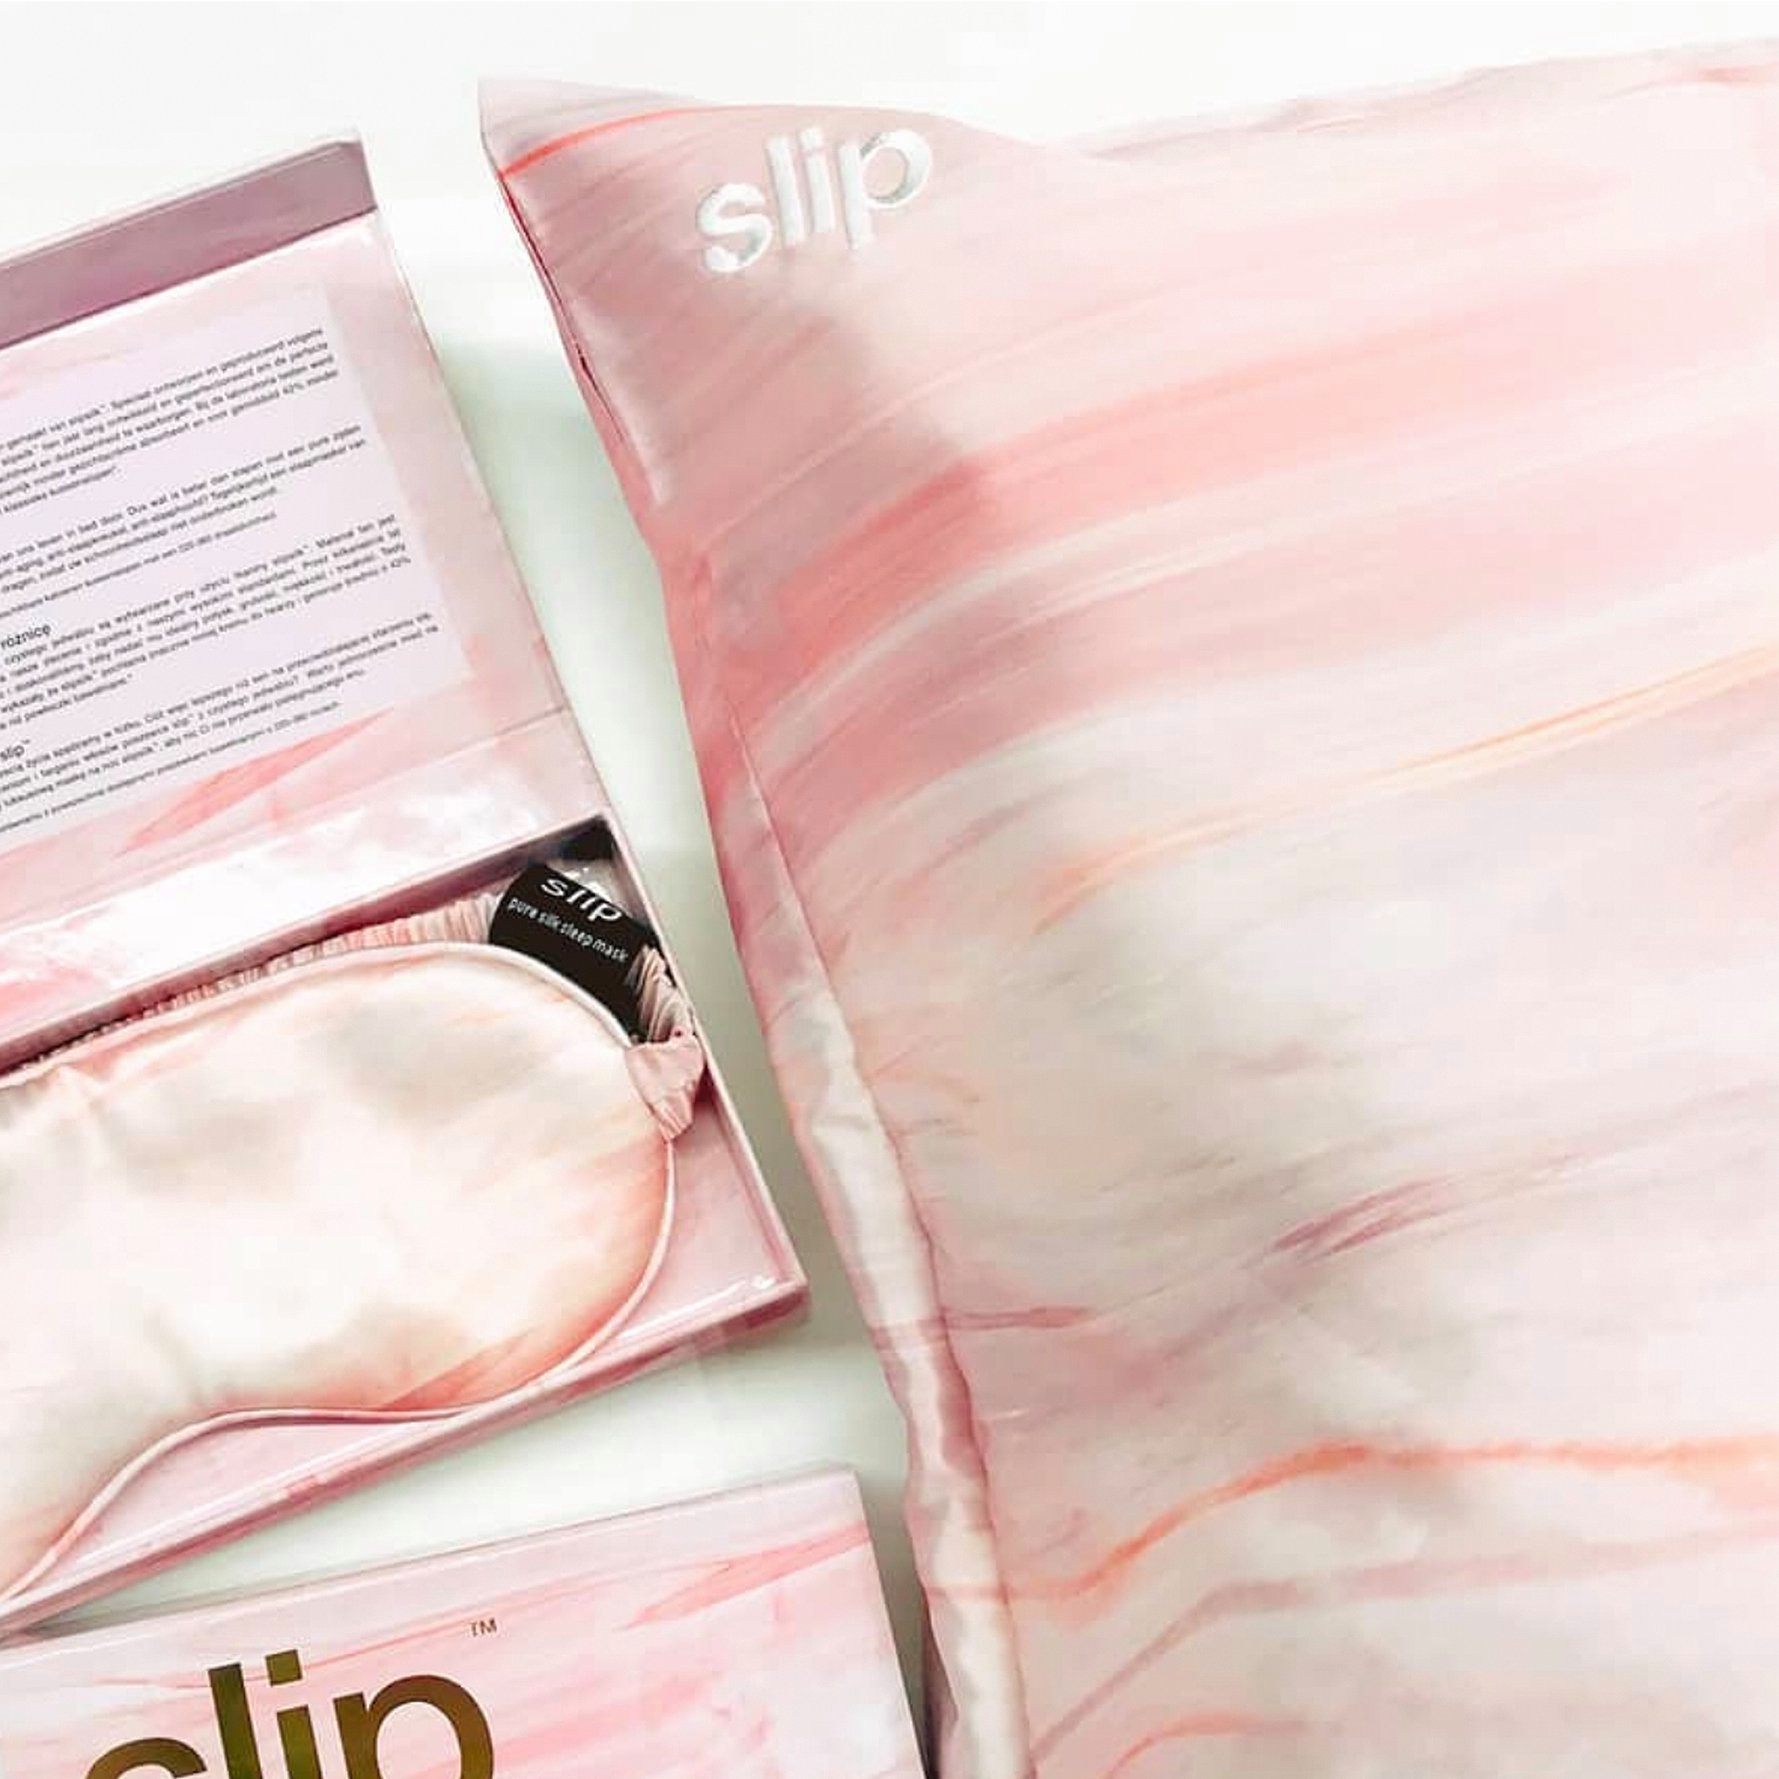 【Dream in Pink】 A little piece of heaven for your bed: Slip is made from the highest grade (6A), long fibre mulberry premium Slipsilk™, not only it makes sleeping so much more indulgent, it also reduces stretching and tugging on your delicate skin, avoiding sleep creases and bed head too